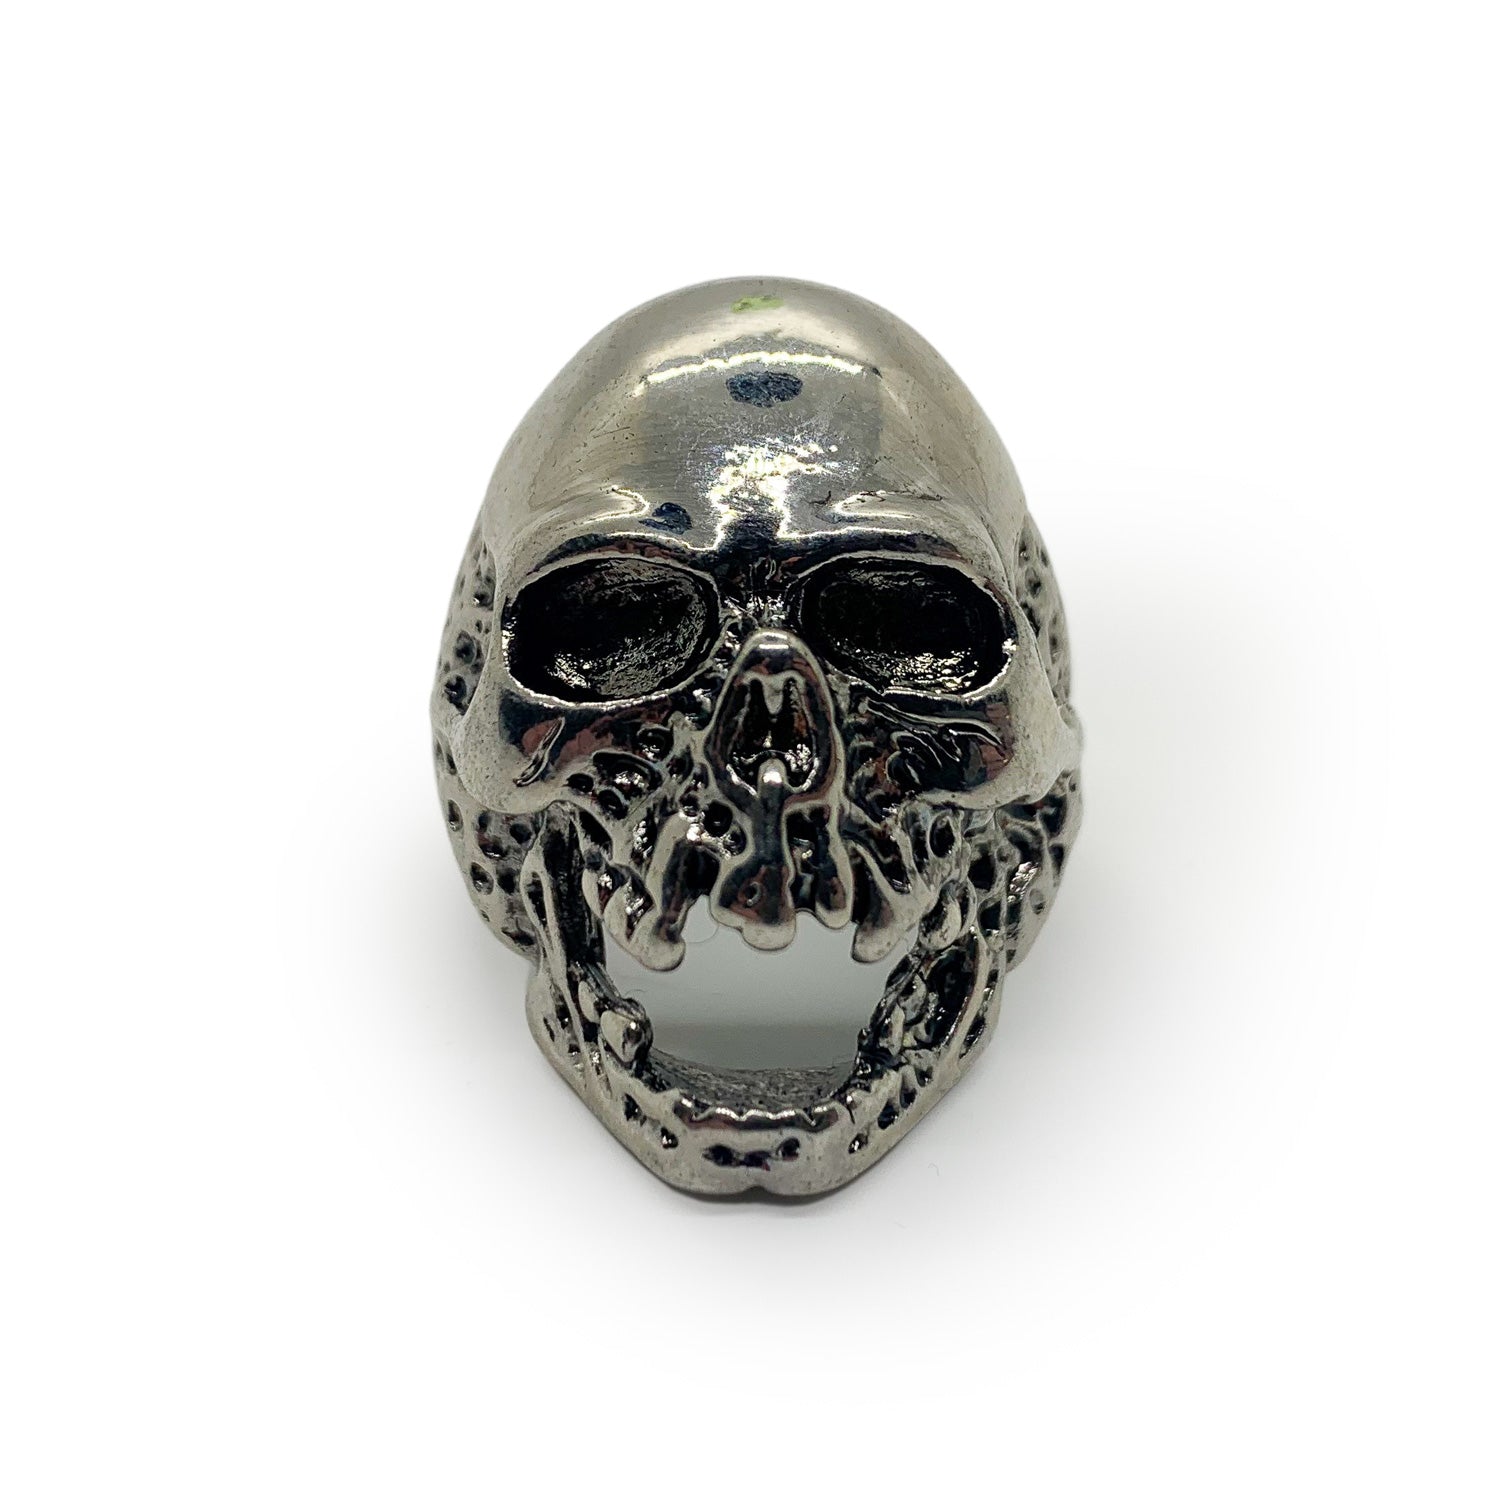 Gaping Eyes and Worm Holes Skull Ring Stainless Steel